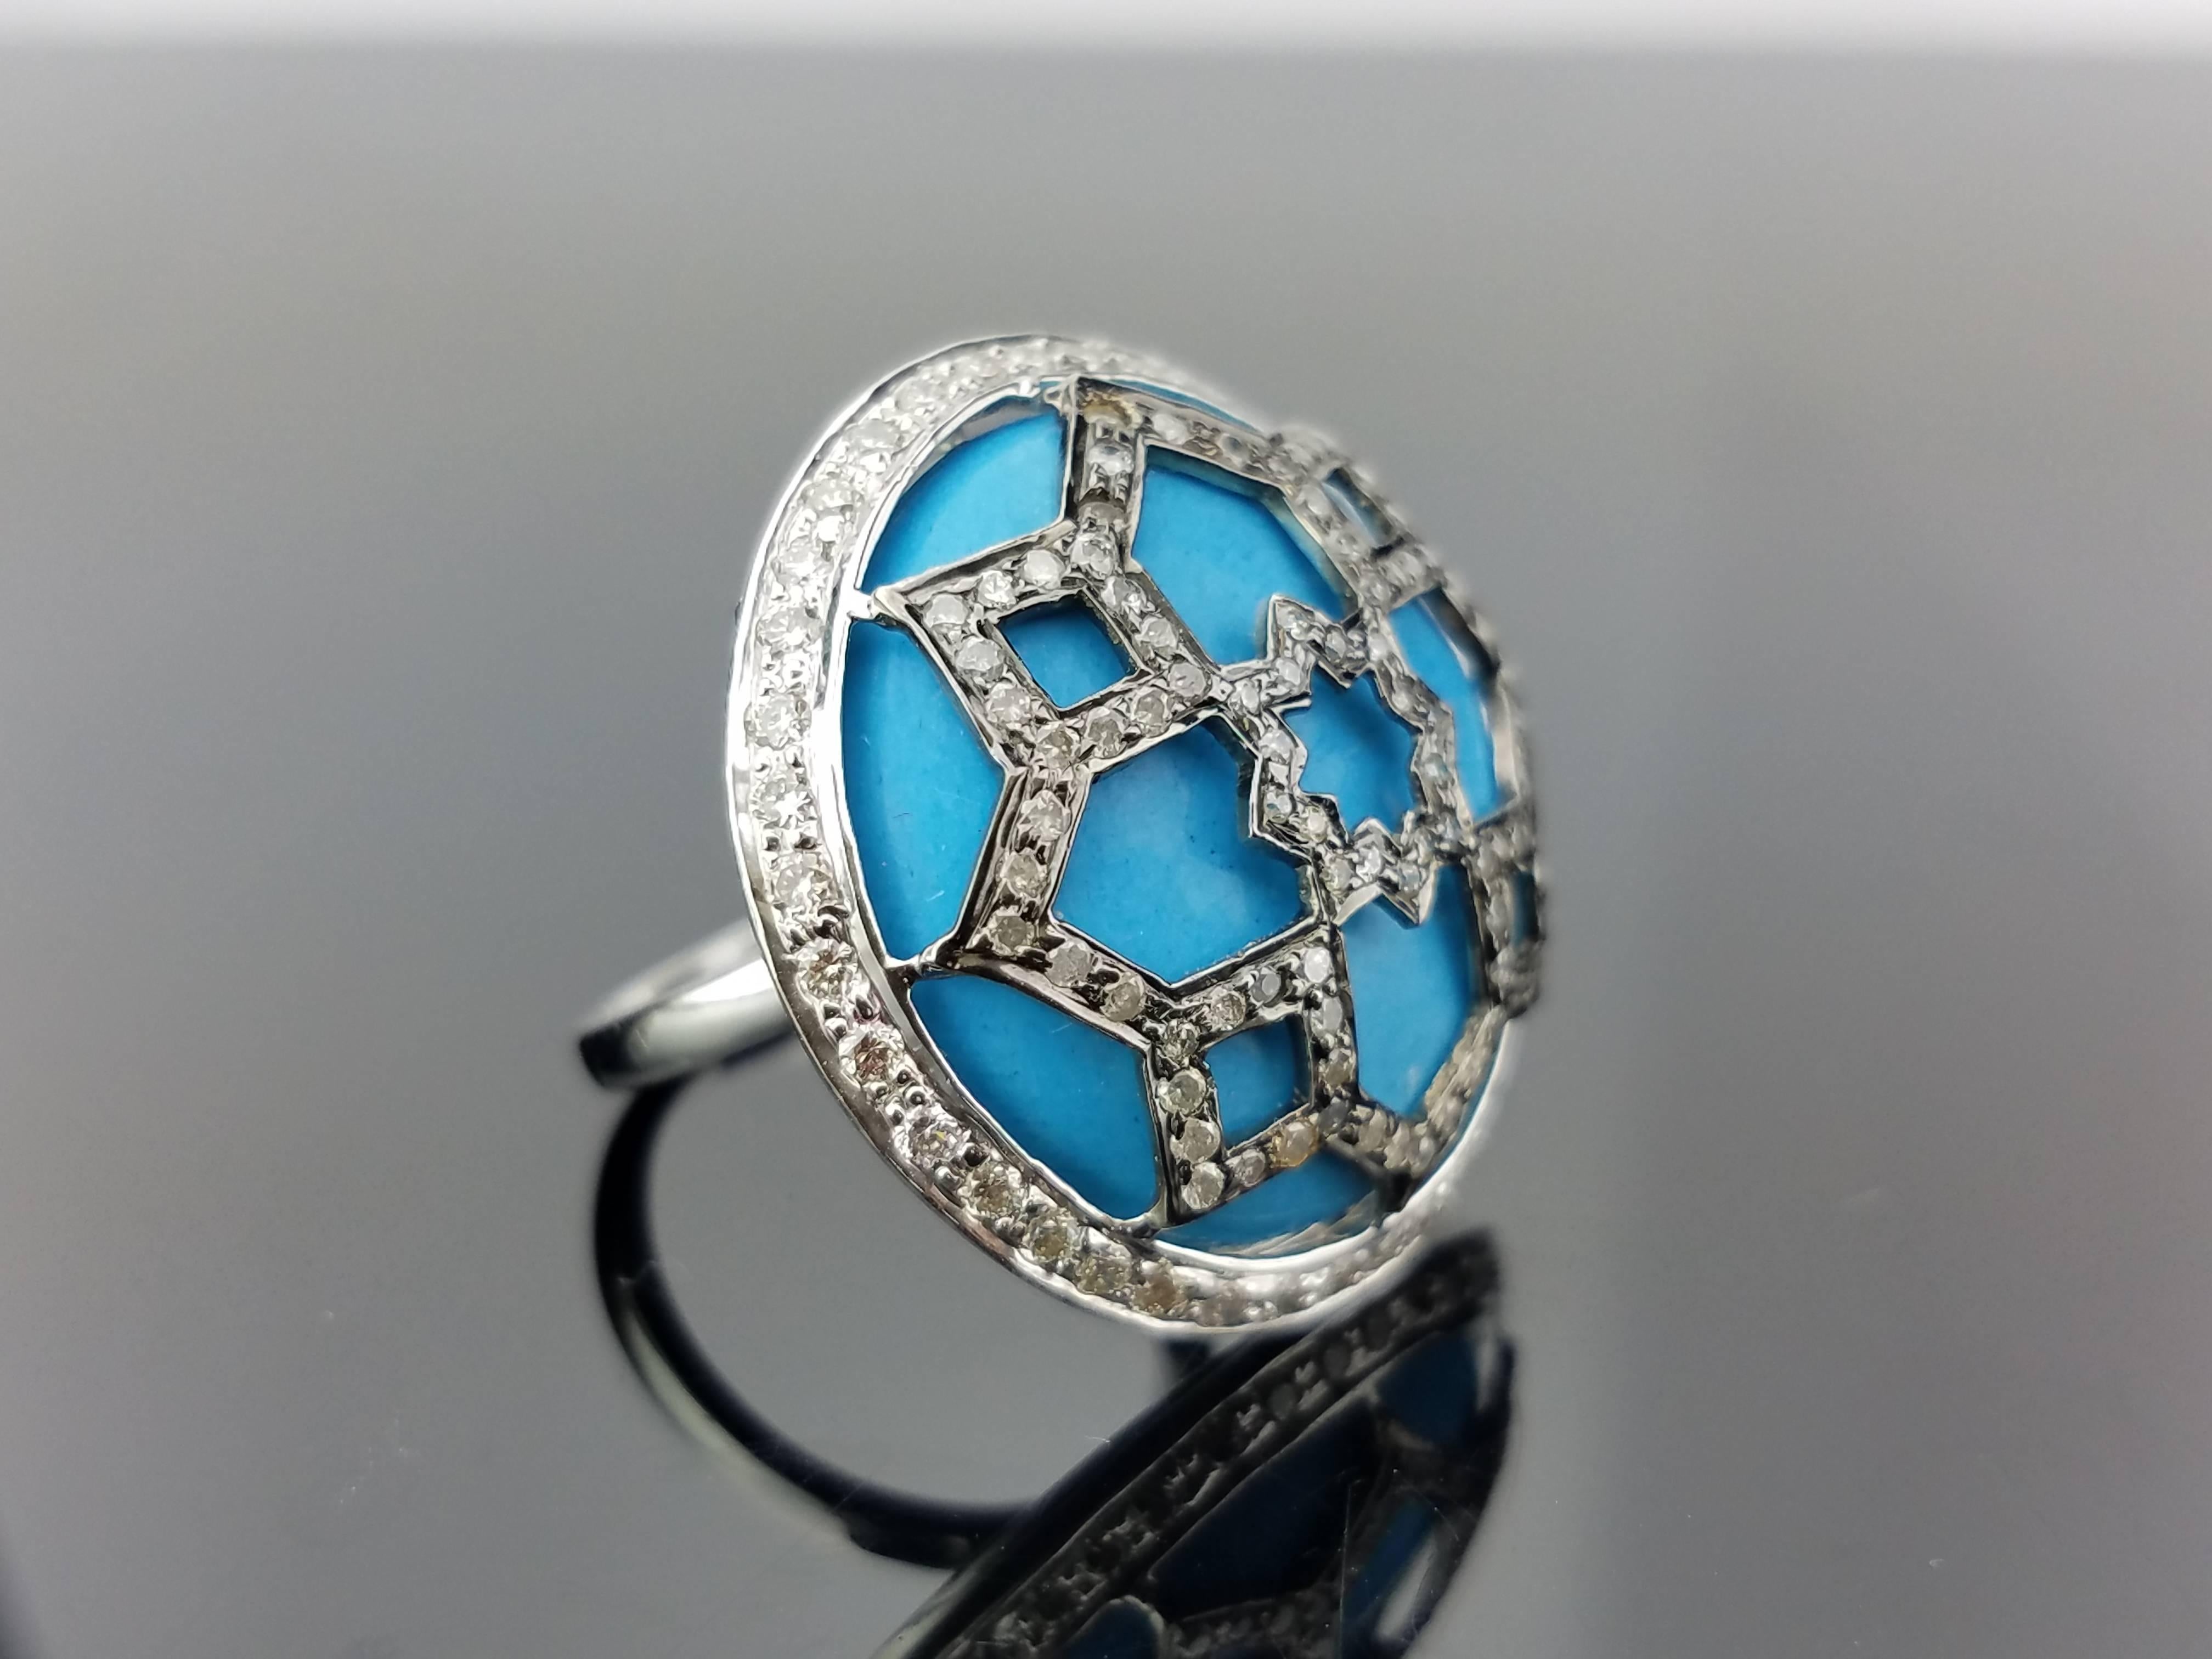 Cabochon Turquoise and Diamond 18 Karat Gold Ring and Earring Suite 1